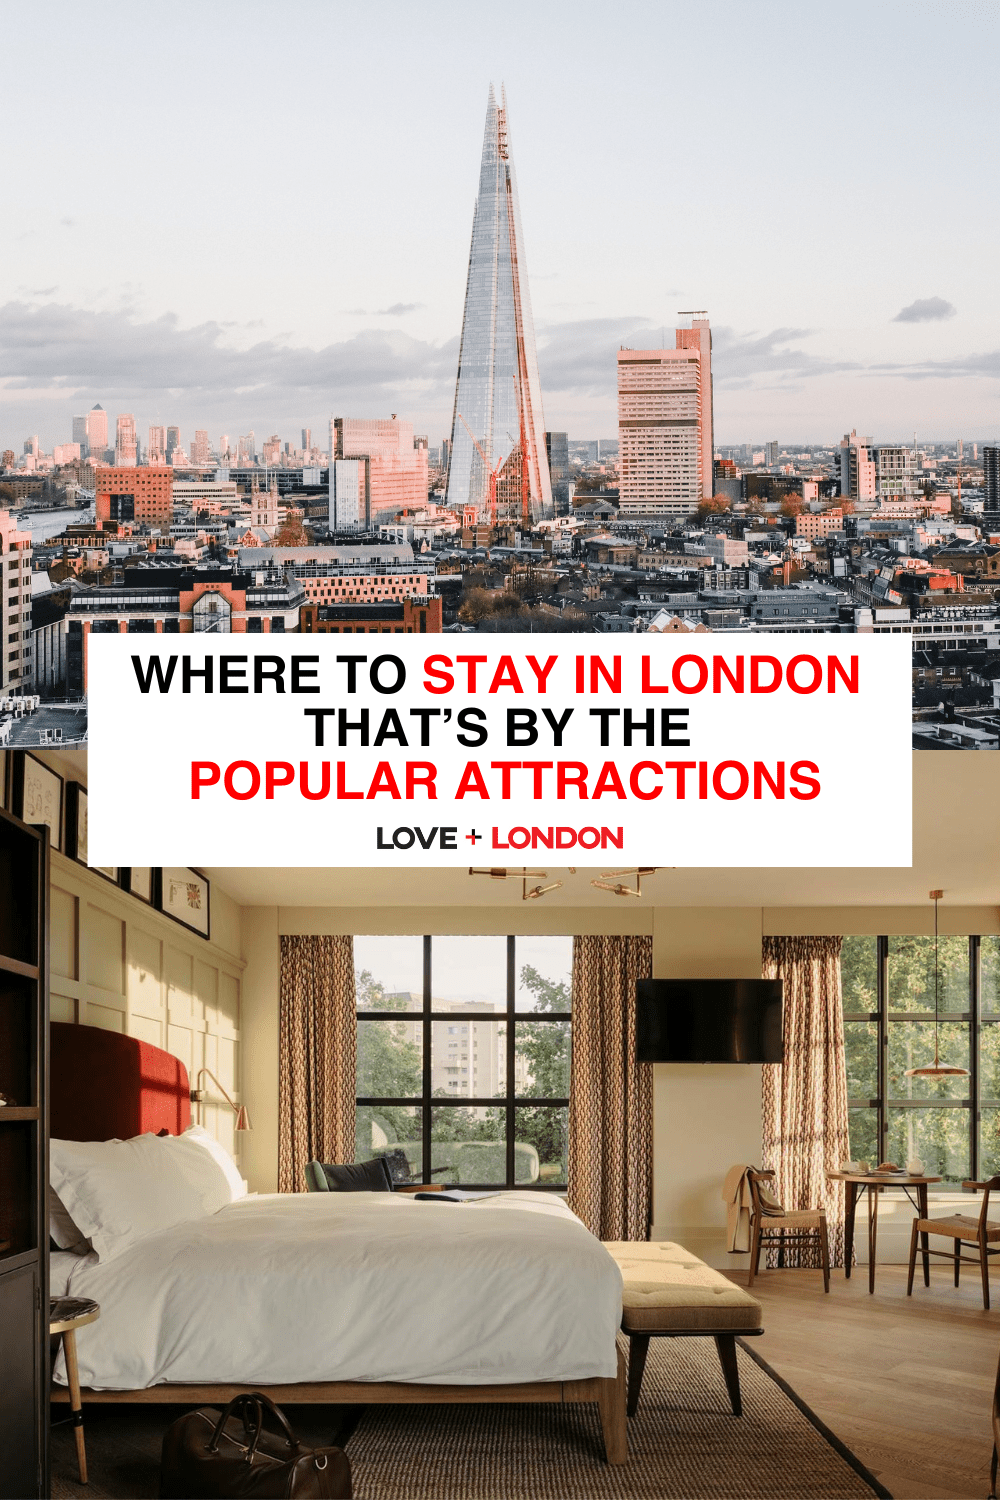 Where To Stay In London That’s By The Popular Attractions